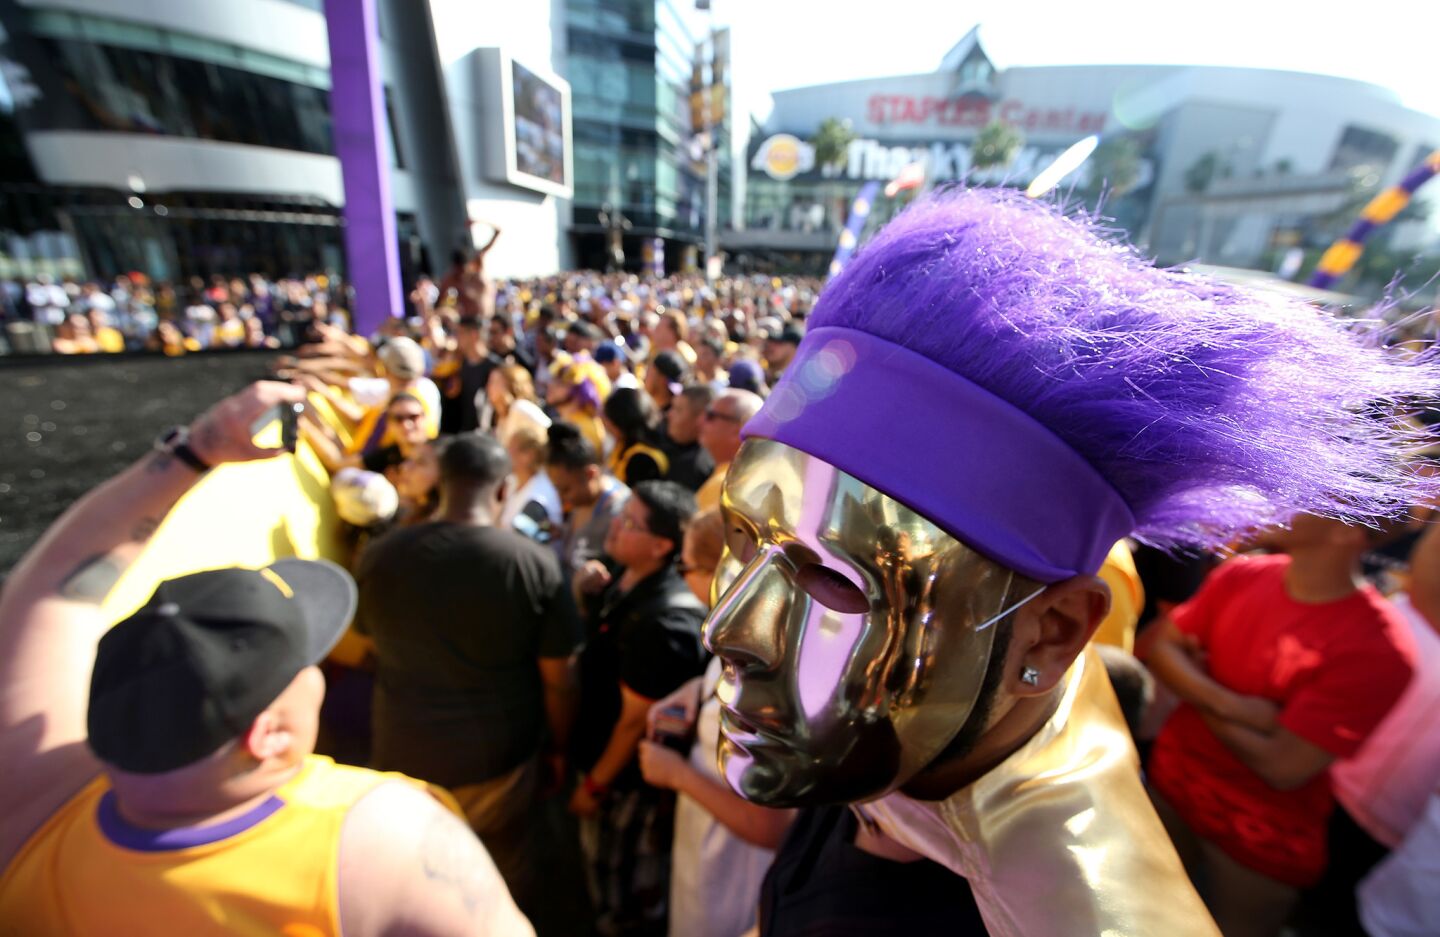 Fans gathered outside Staples Center ahead of Kobe Bryant's final game with the Lakers.